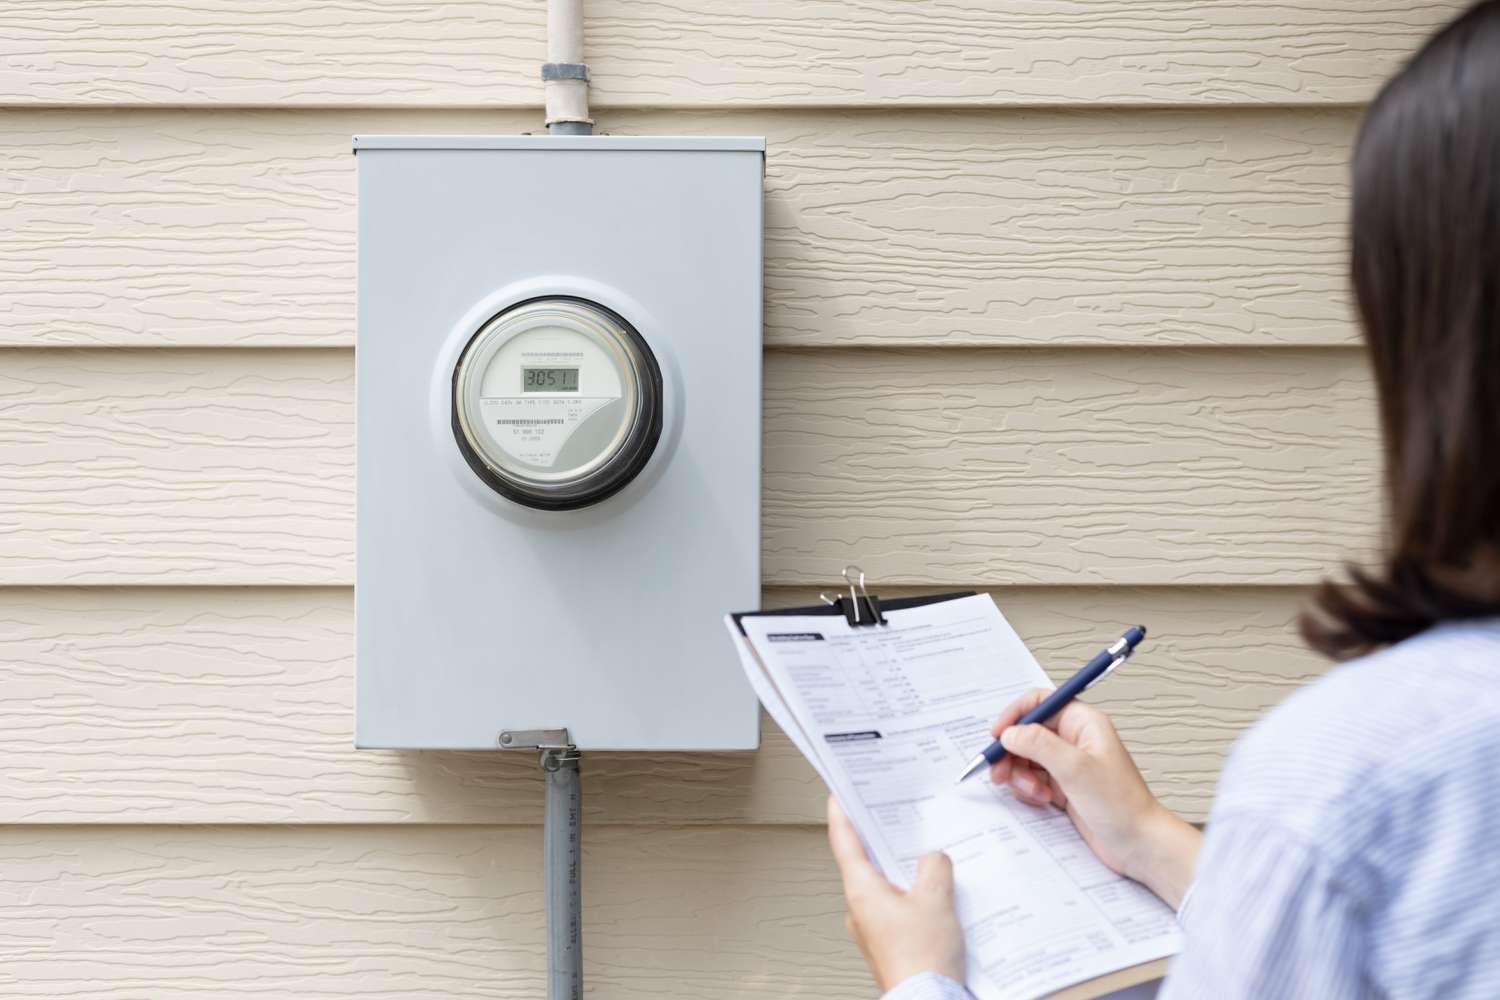 15 Simple Energy-Saving Strategies To Lower Your Electric Bill